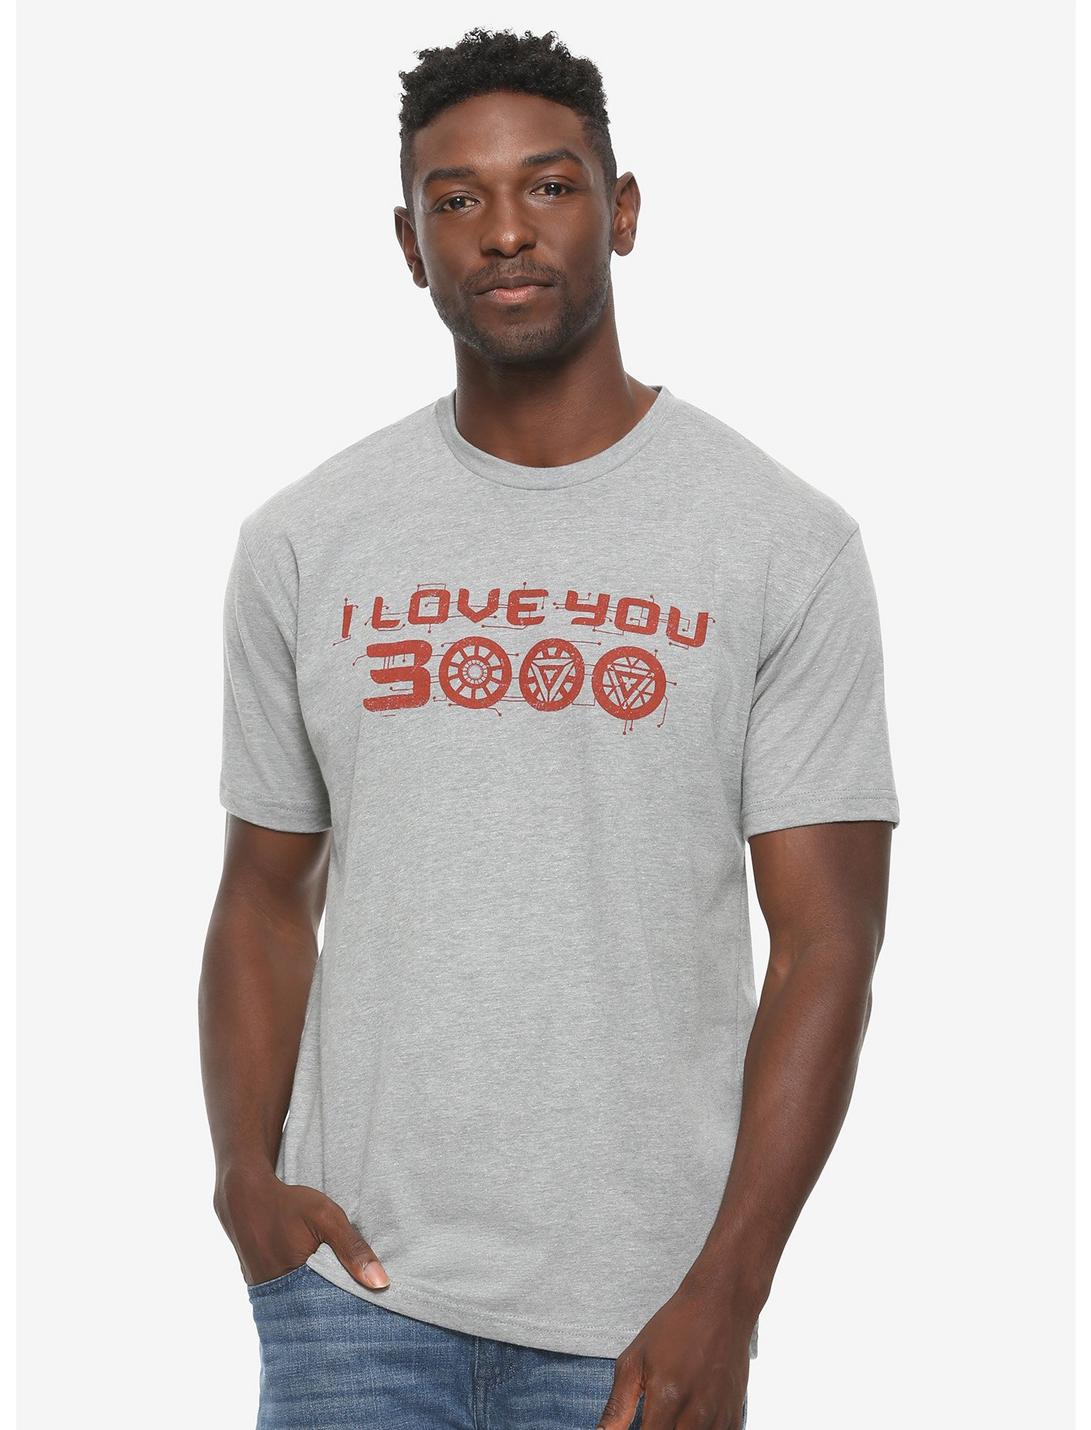 Marvel Avengers: Endgame Iron Man I Love You 3000 T-Shirt - BoxLunch Exclusive, GREY, hi-res